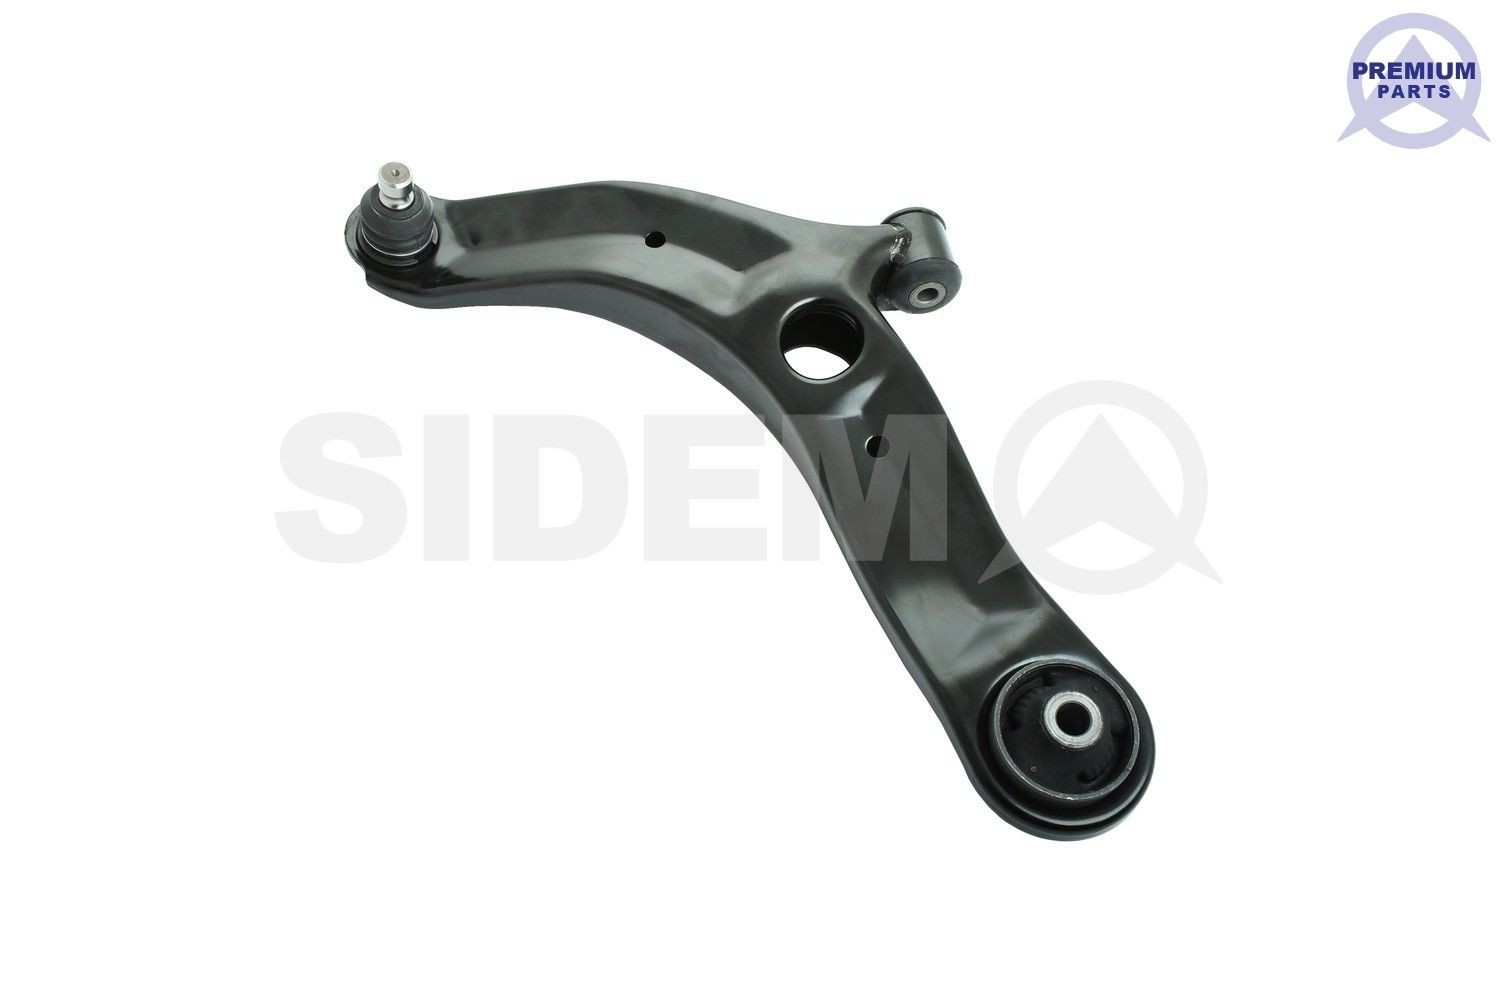 SIDEM 89374 Suspension arm Lower, Front Axle Left, Control Arm, Sheet Steel, Cone Size: 20 mm, Push Rod